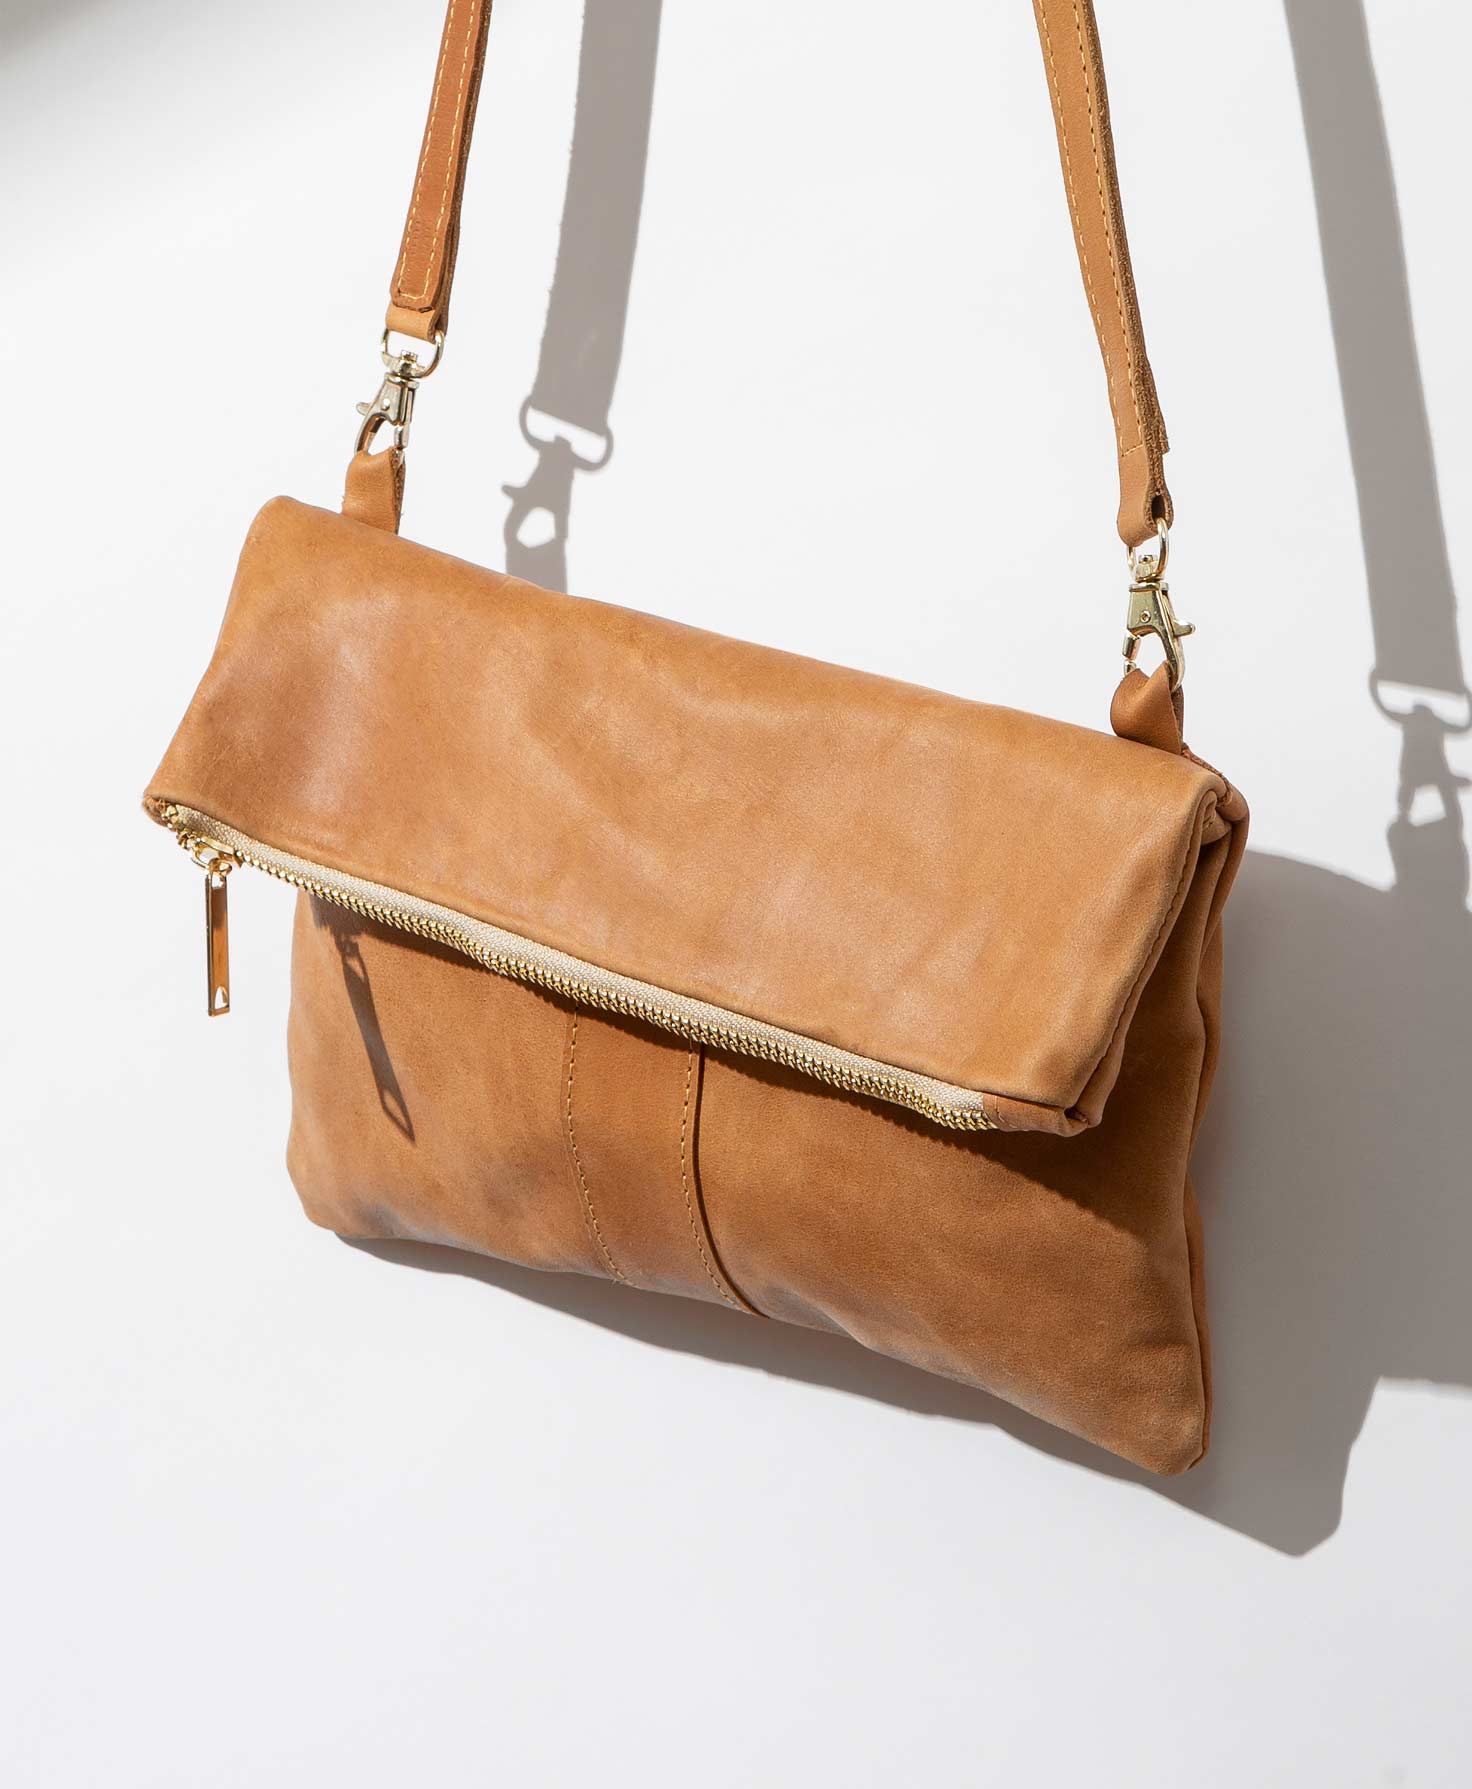 The Adwa Foldover Clutch is shown hanging against a white wall. It is made of buttery-soft, caramel-colored leather. The top third of the bag is folded over, and to open the bag the wearer unfolds it and unzips the golden zipper at the top. The straps are connected to the top of the fold via two golden clips positioned on either side of the bag. The long leather strap can be adjusted or removed entirely. 